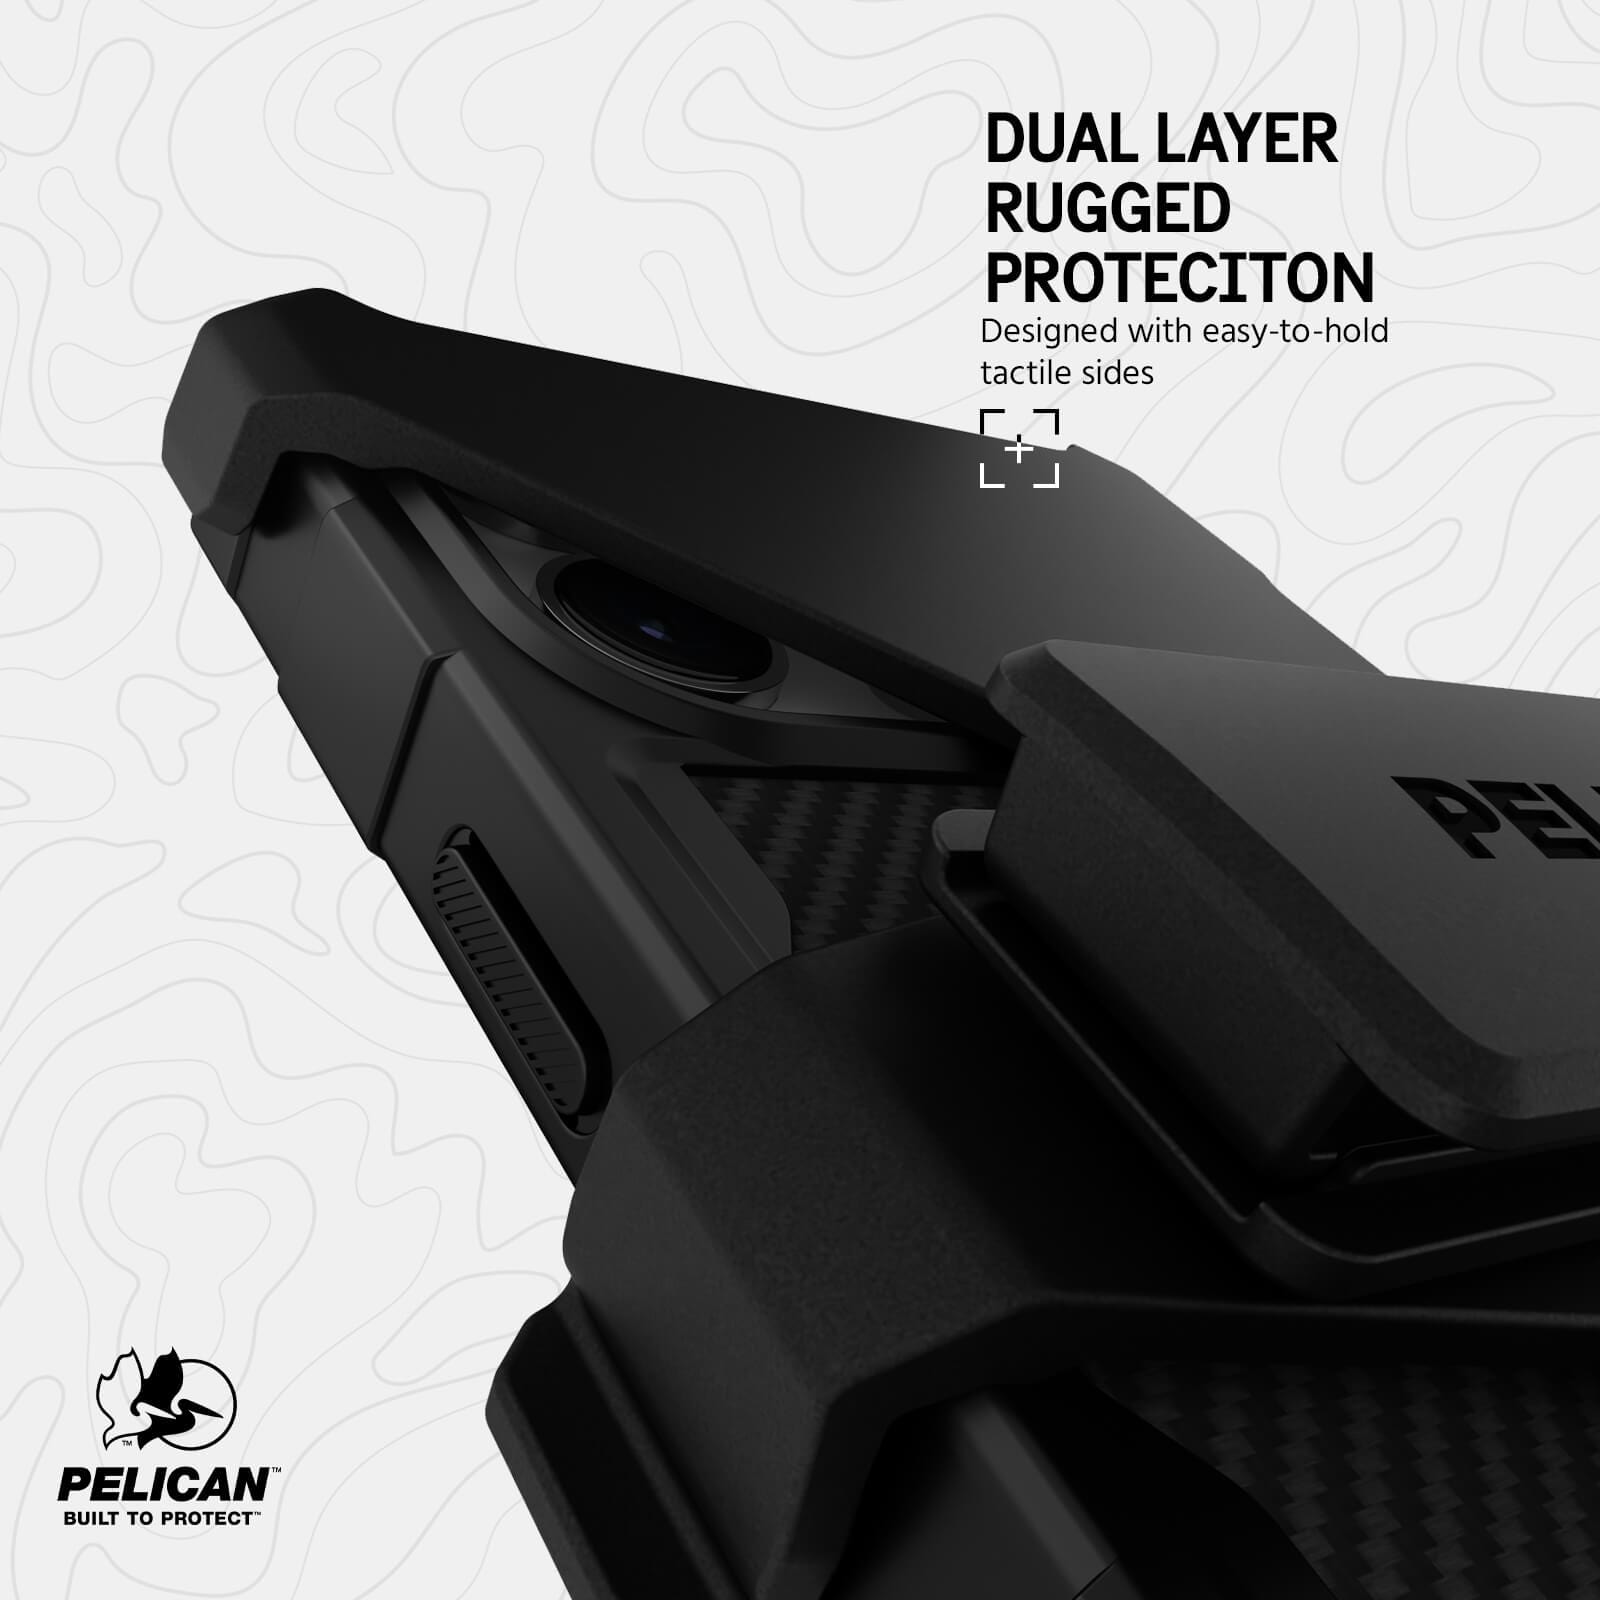 DUAL LAYER RUGGED PROTECTION. DESIGNED WITH EASY-TO-HOLD TACTILE SIDES.